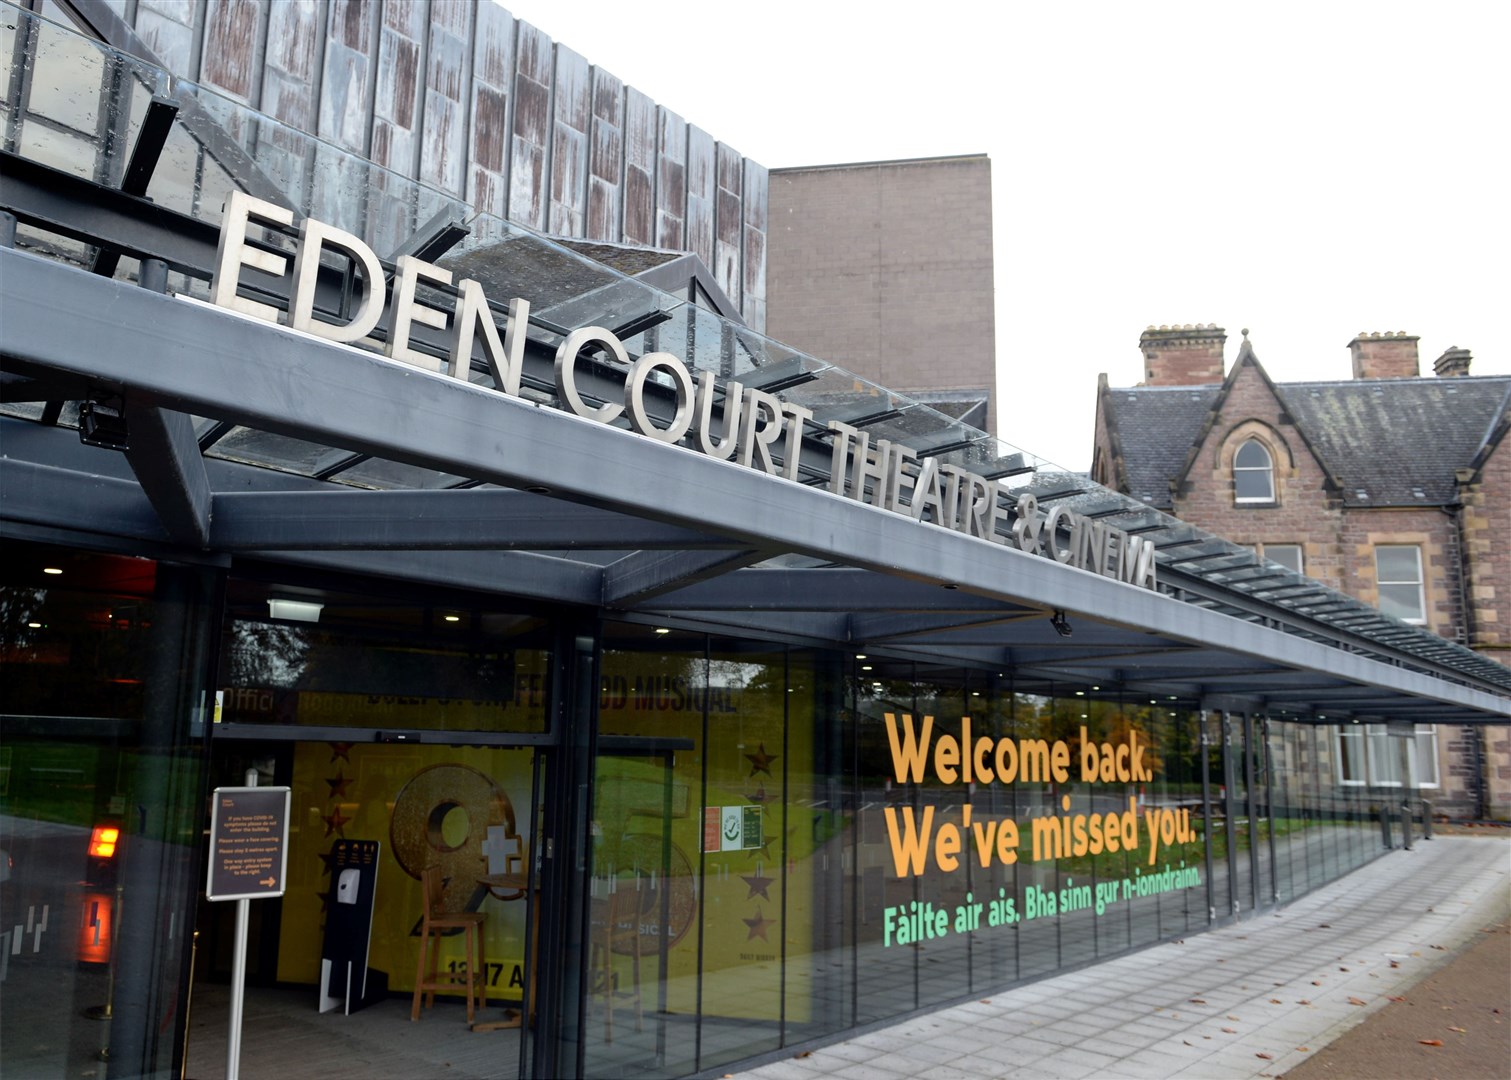 Eden Court Theatre and Cinema has now partially reopened.